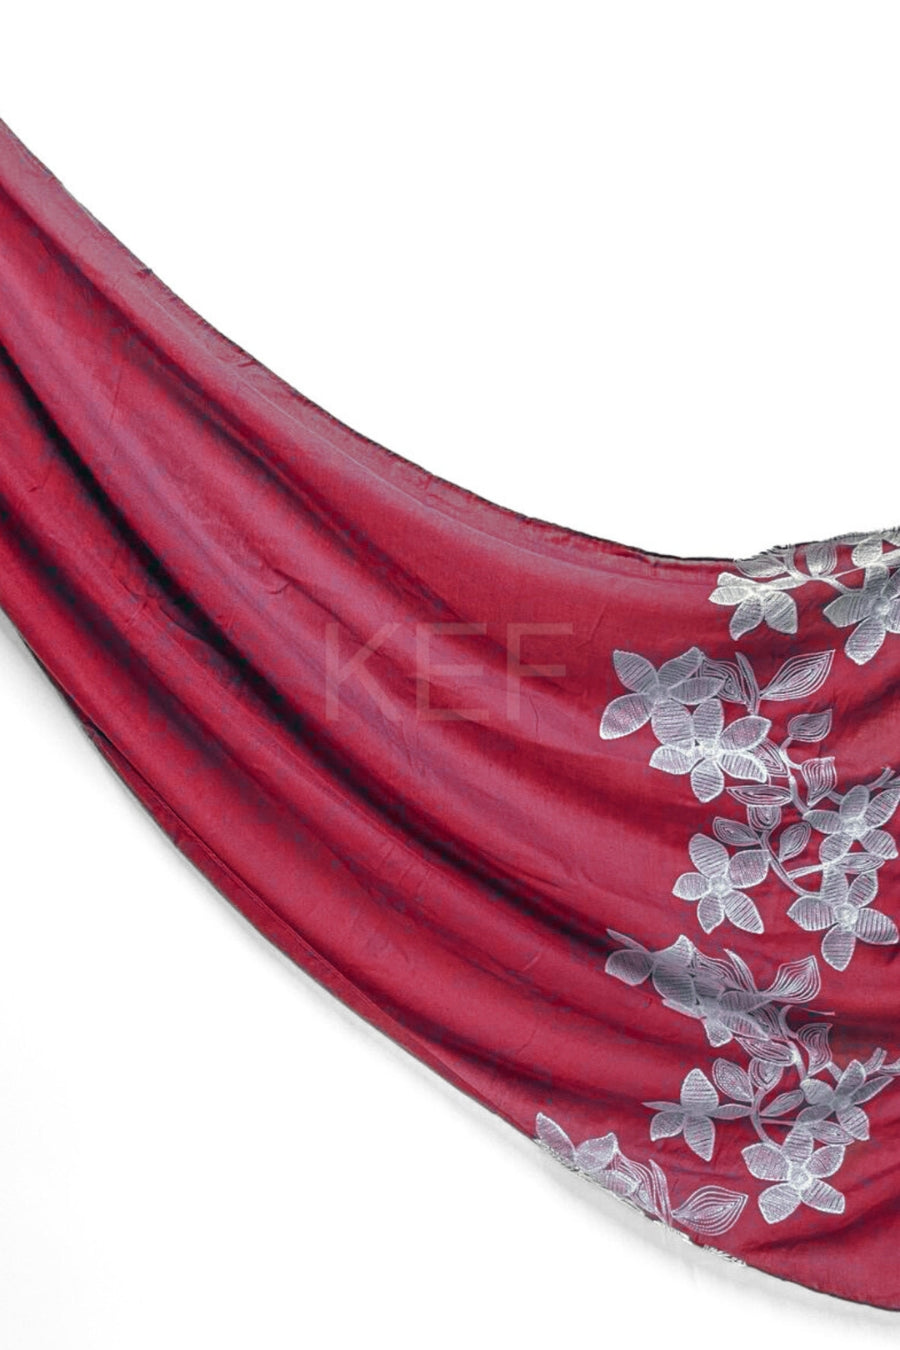 Flower Embroidery Lawn Hijab - Cherry Red